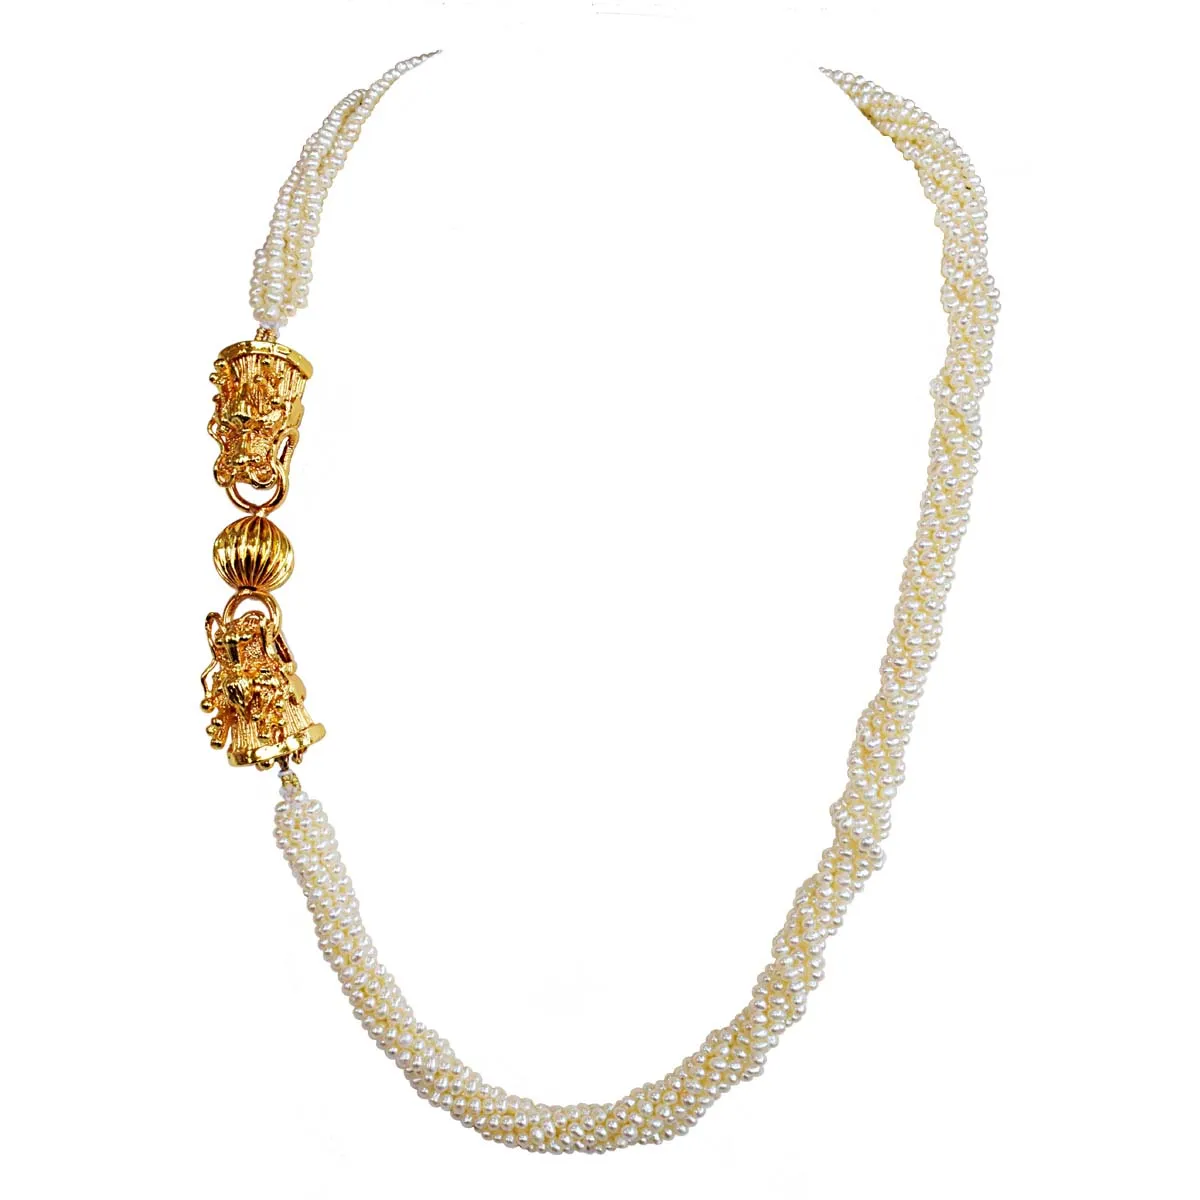 6 Line Twisted Real Freshwater Pearl & Fancy Gold Plated Clasp Necklace for Women (SN1049)